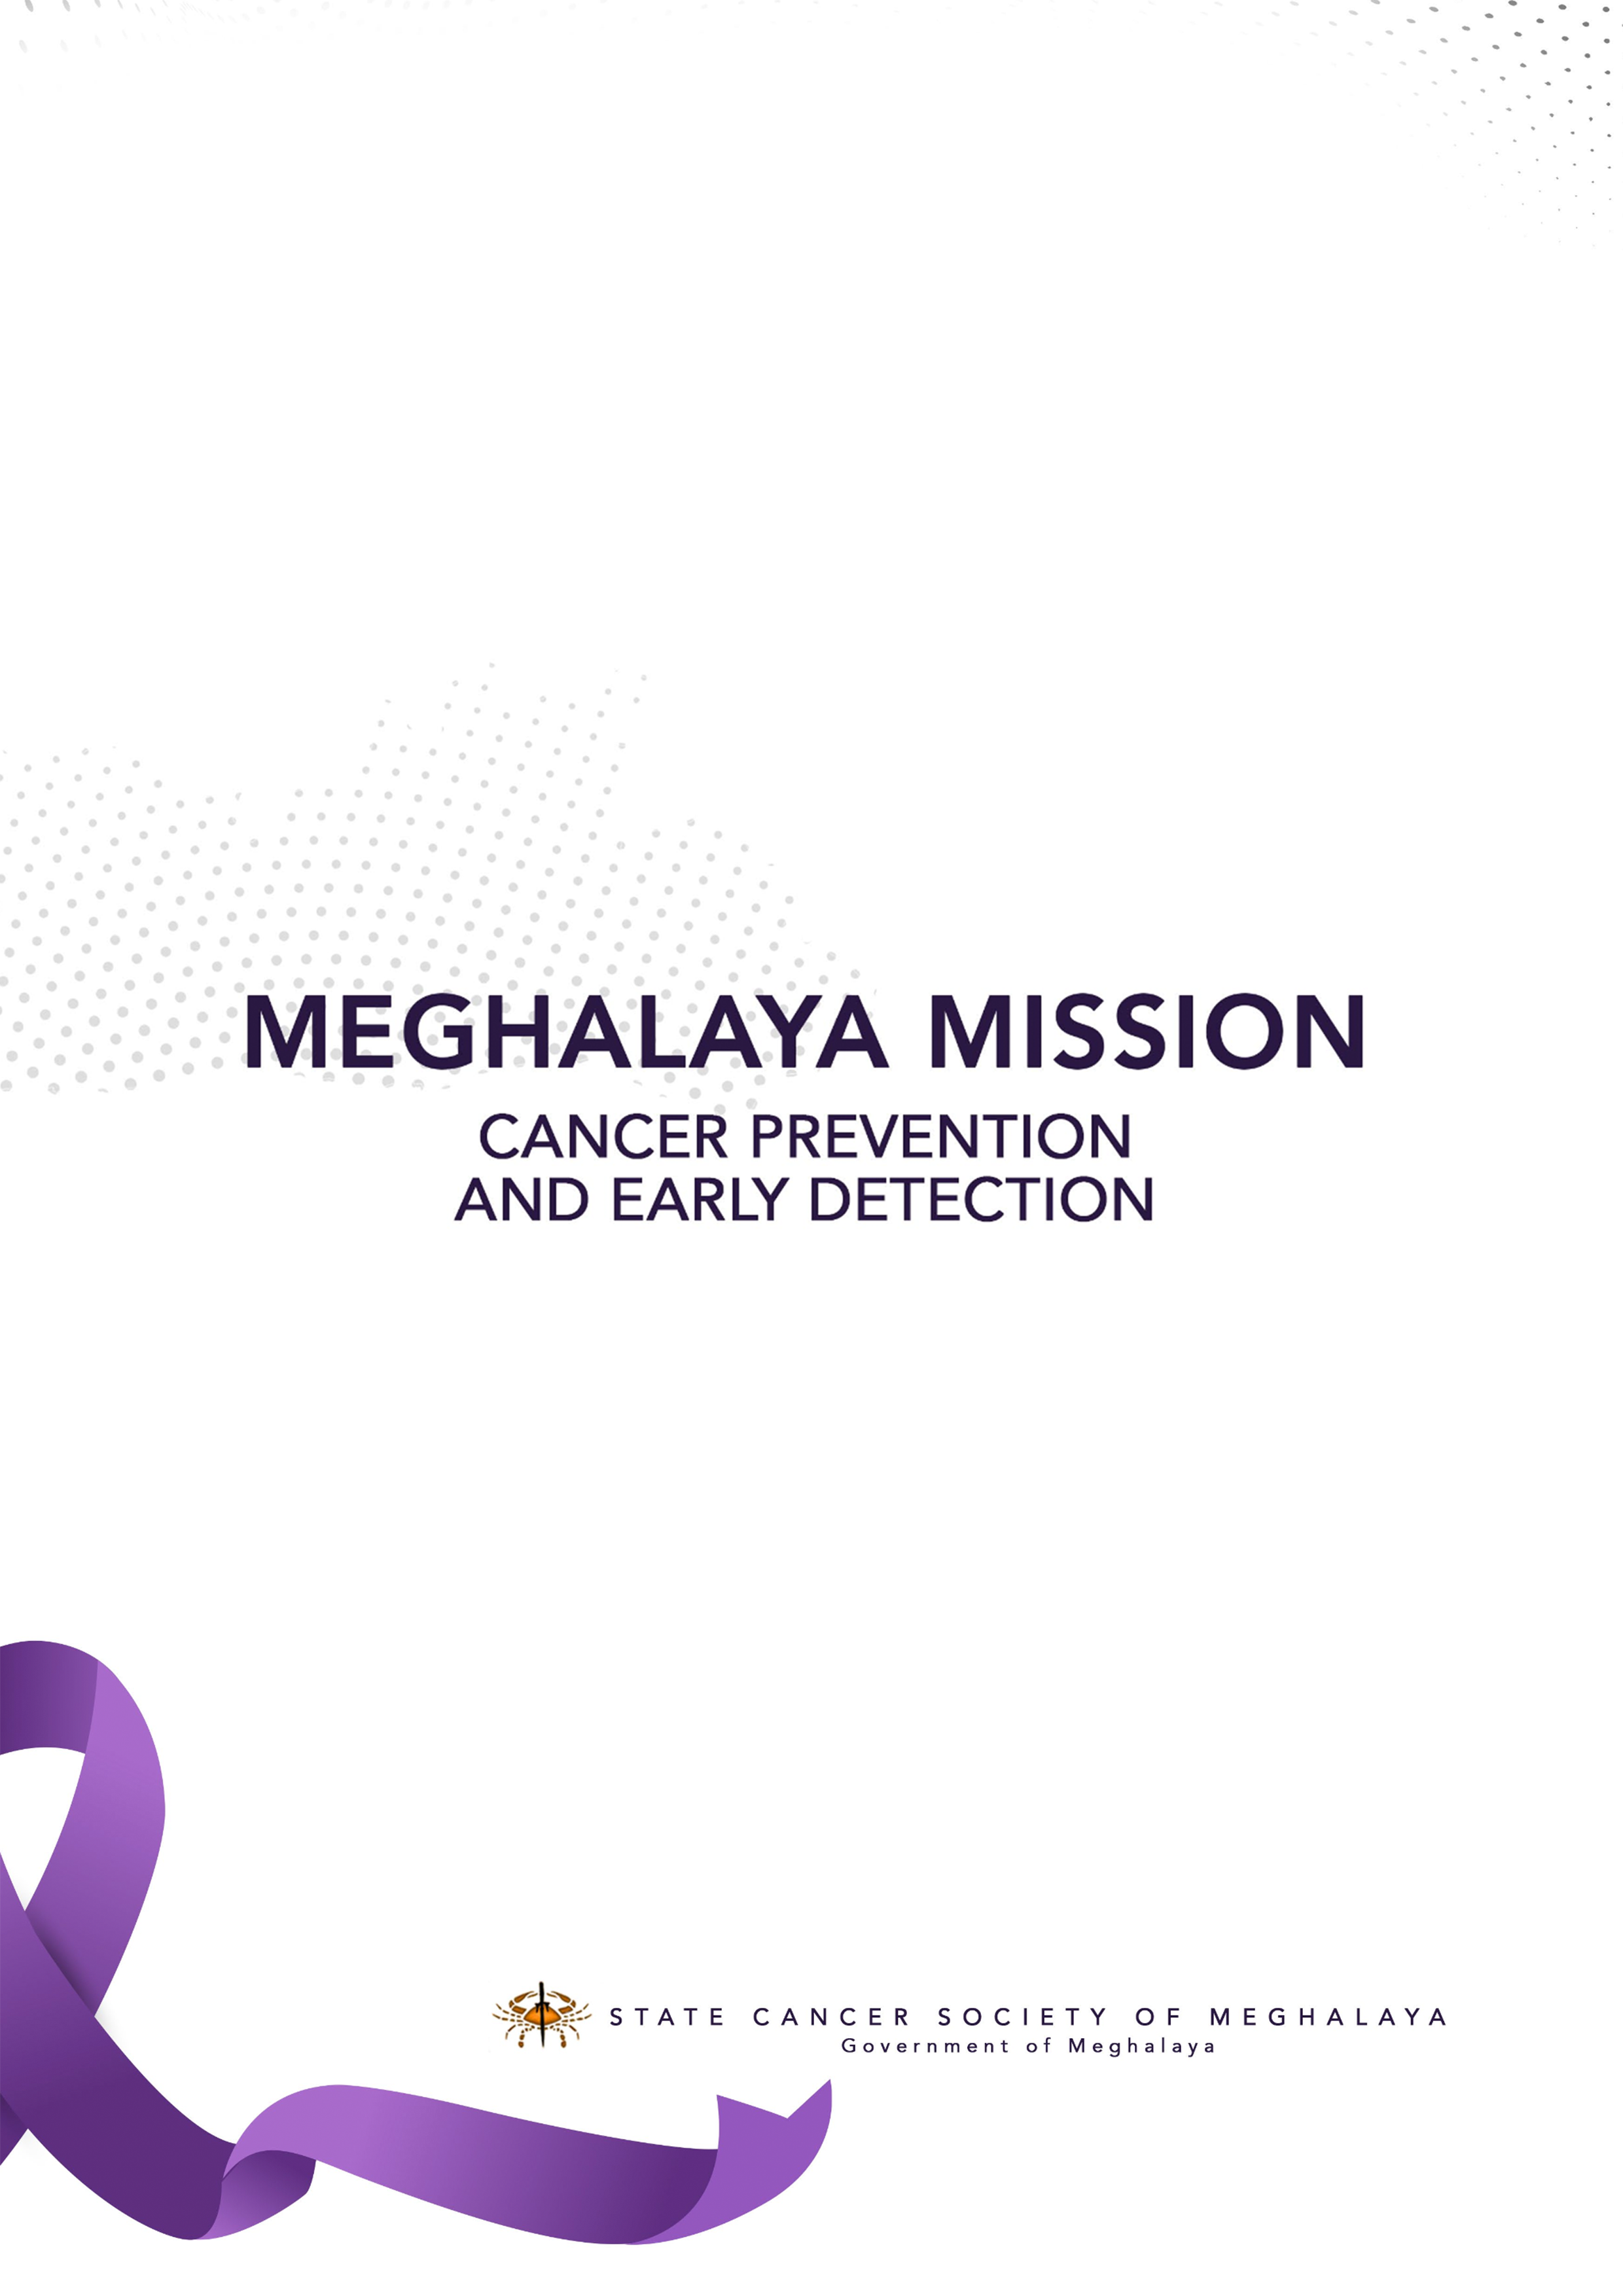 Meghalaya Mission Cancer Prevention and Early Detection